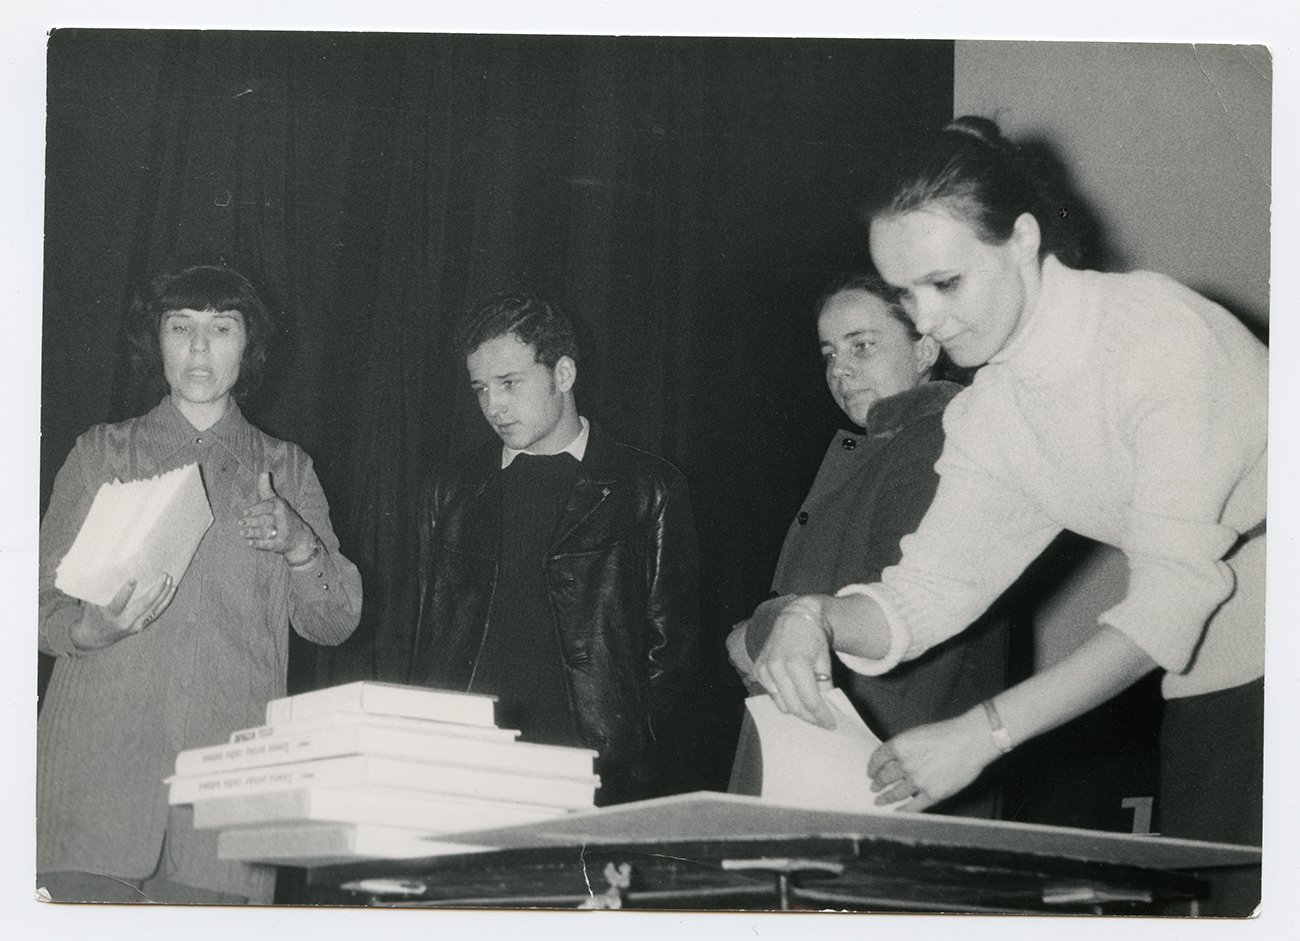 Meeting with a writer, Staromiejskie cinema, Danuta Połoncarz (first on the left), manager of the Staromiejskie, 1970s, collection of Danuta Połoncarz.